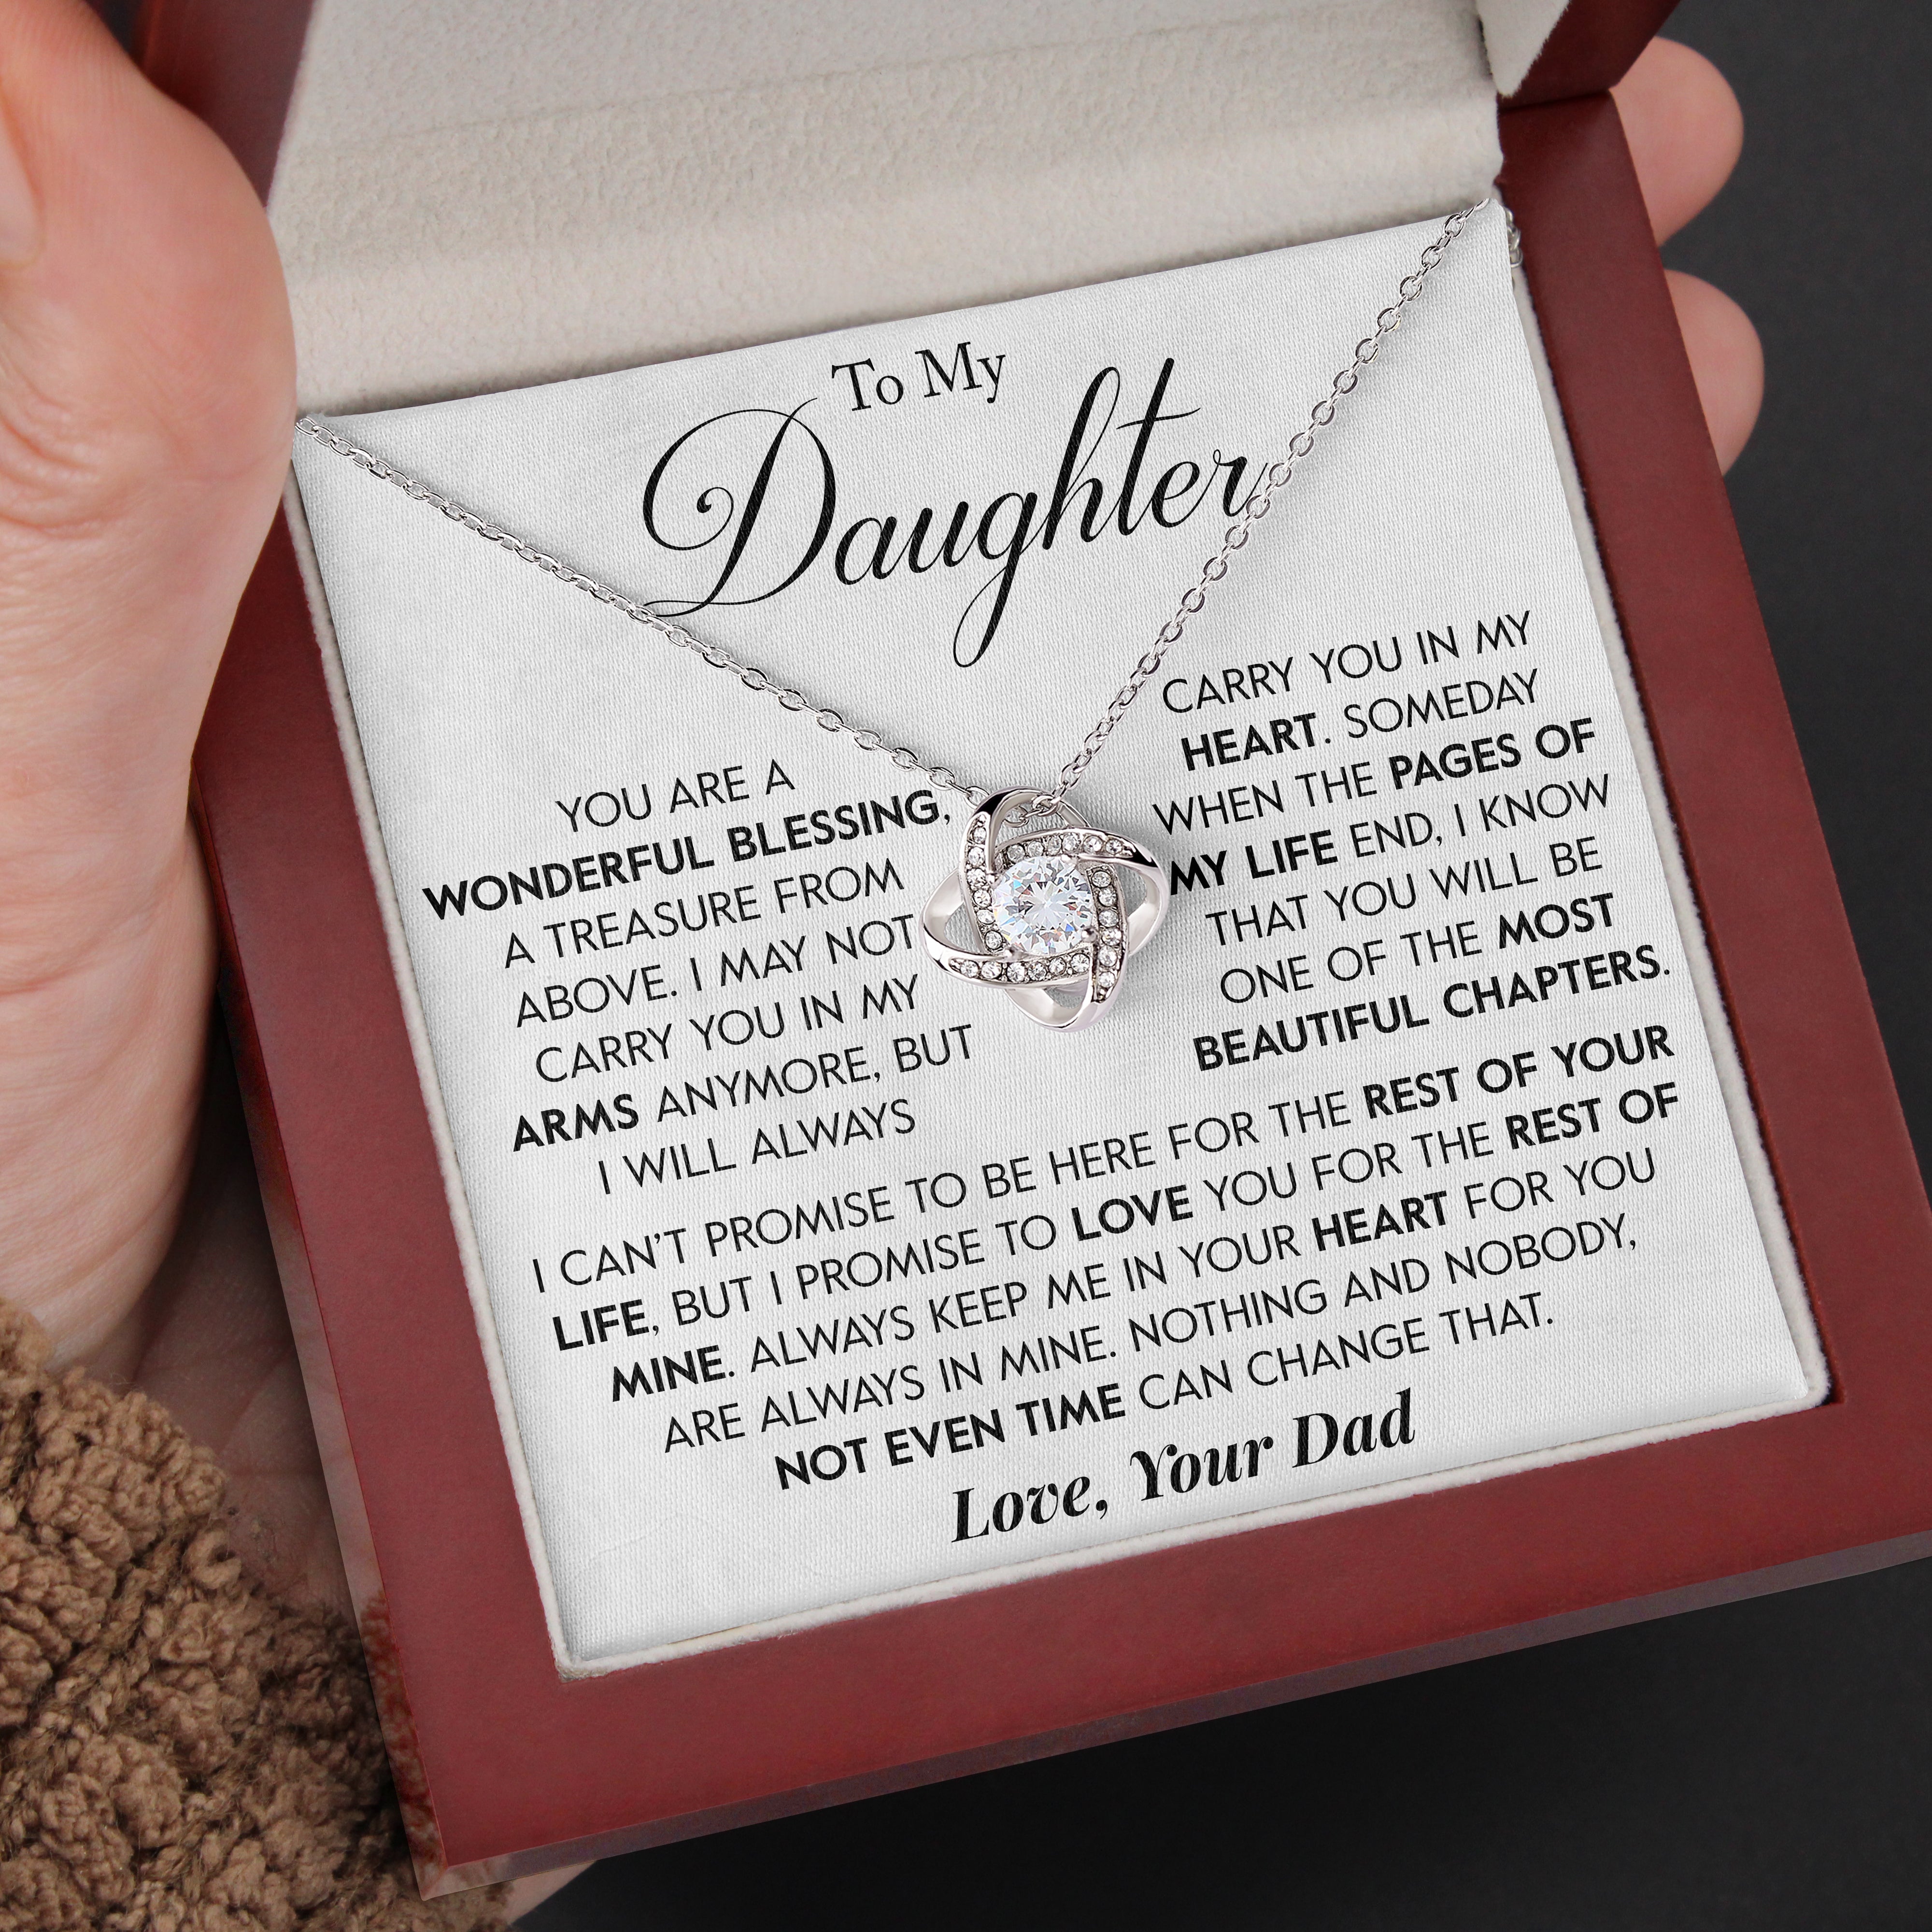 To My Daughter | "Wonderful Blessing" | Love Knot Necklace